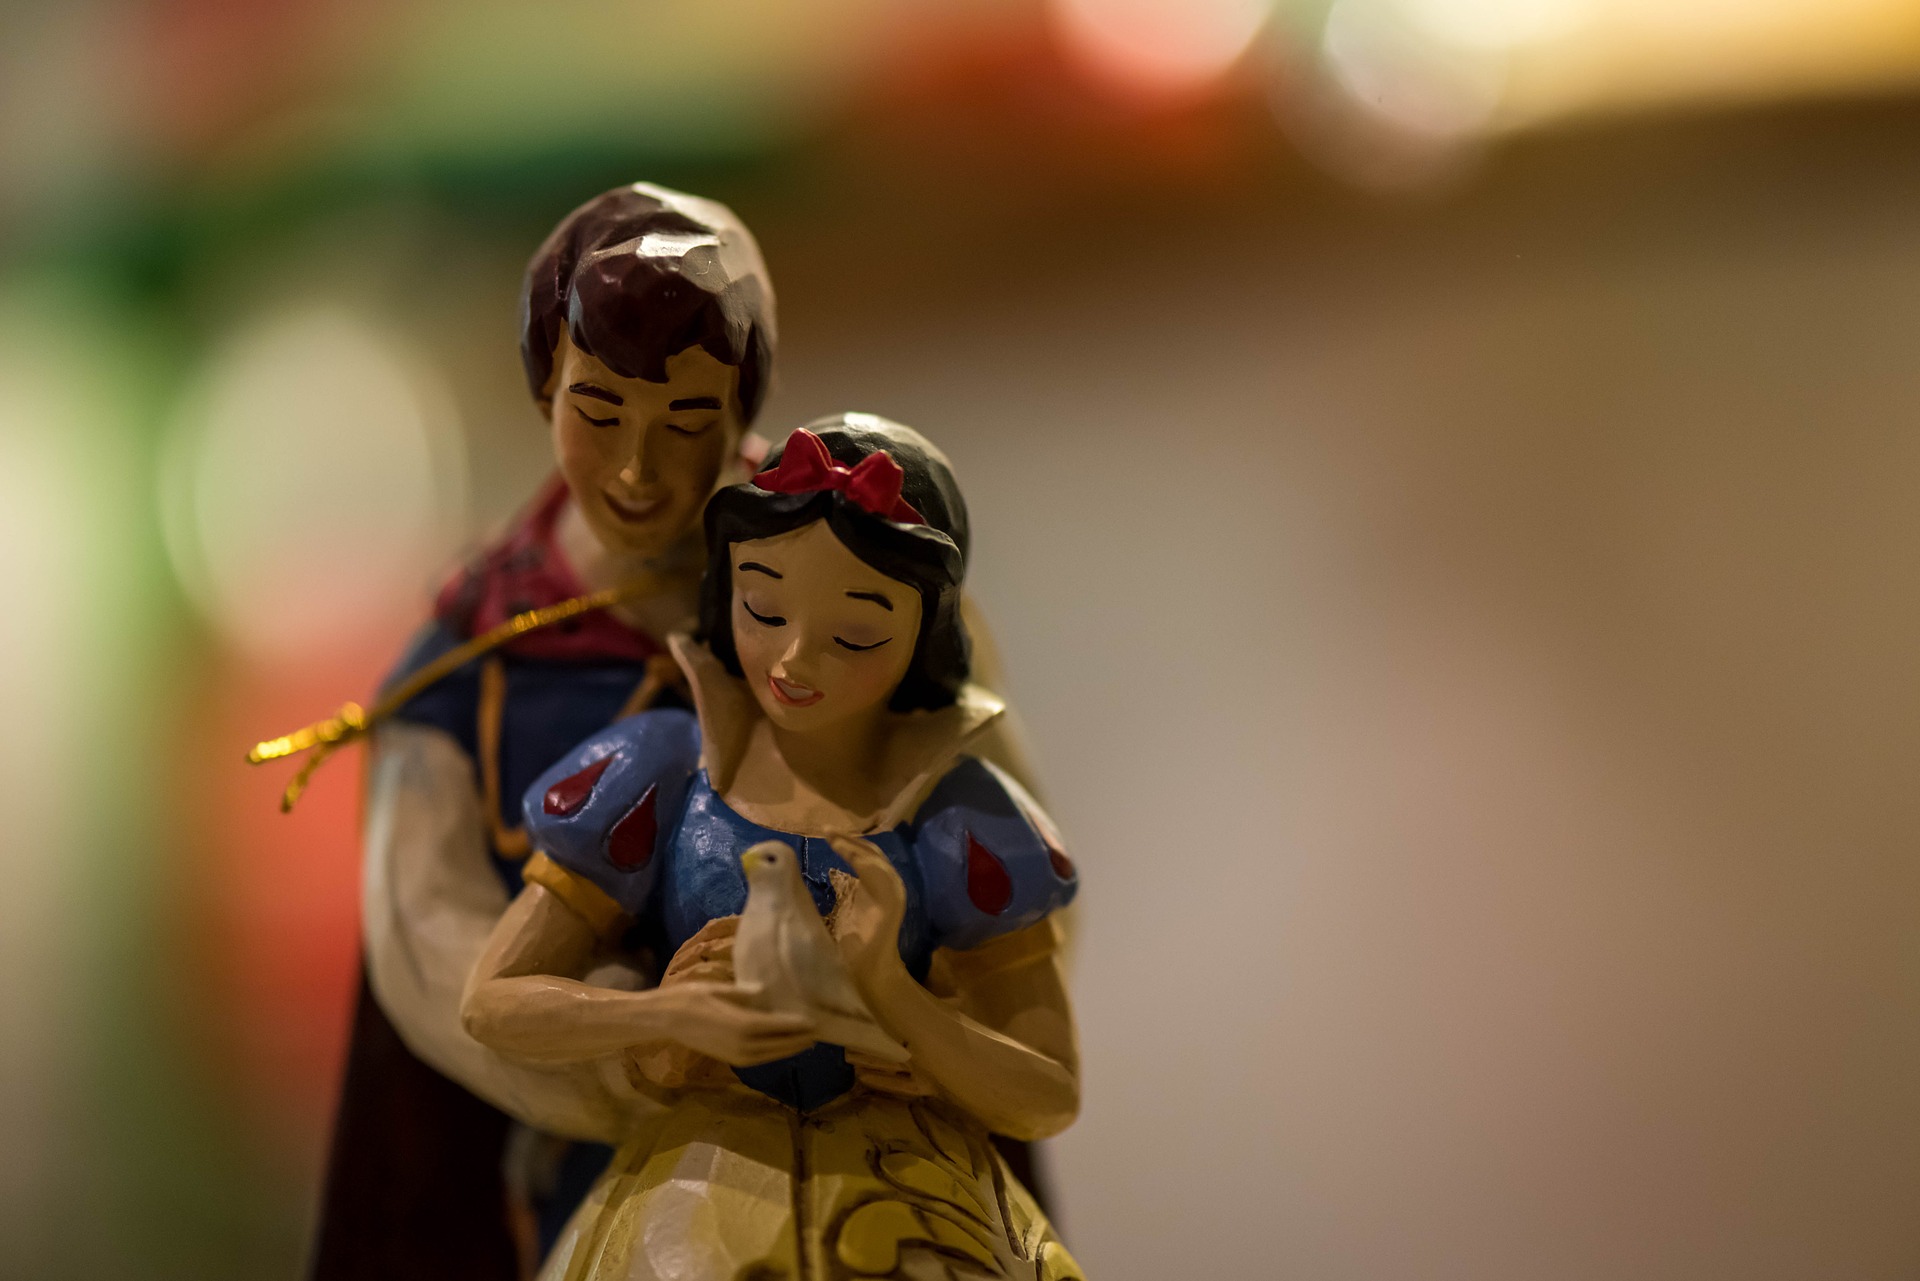 The story of Snow White story embodies the kinds of gender biases children are exposed to.